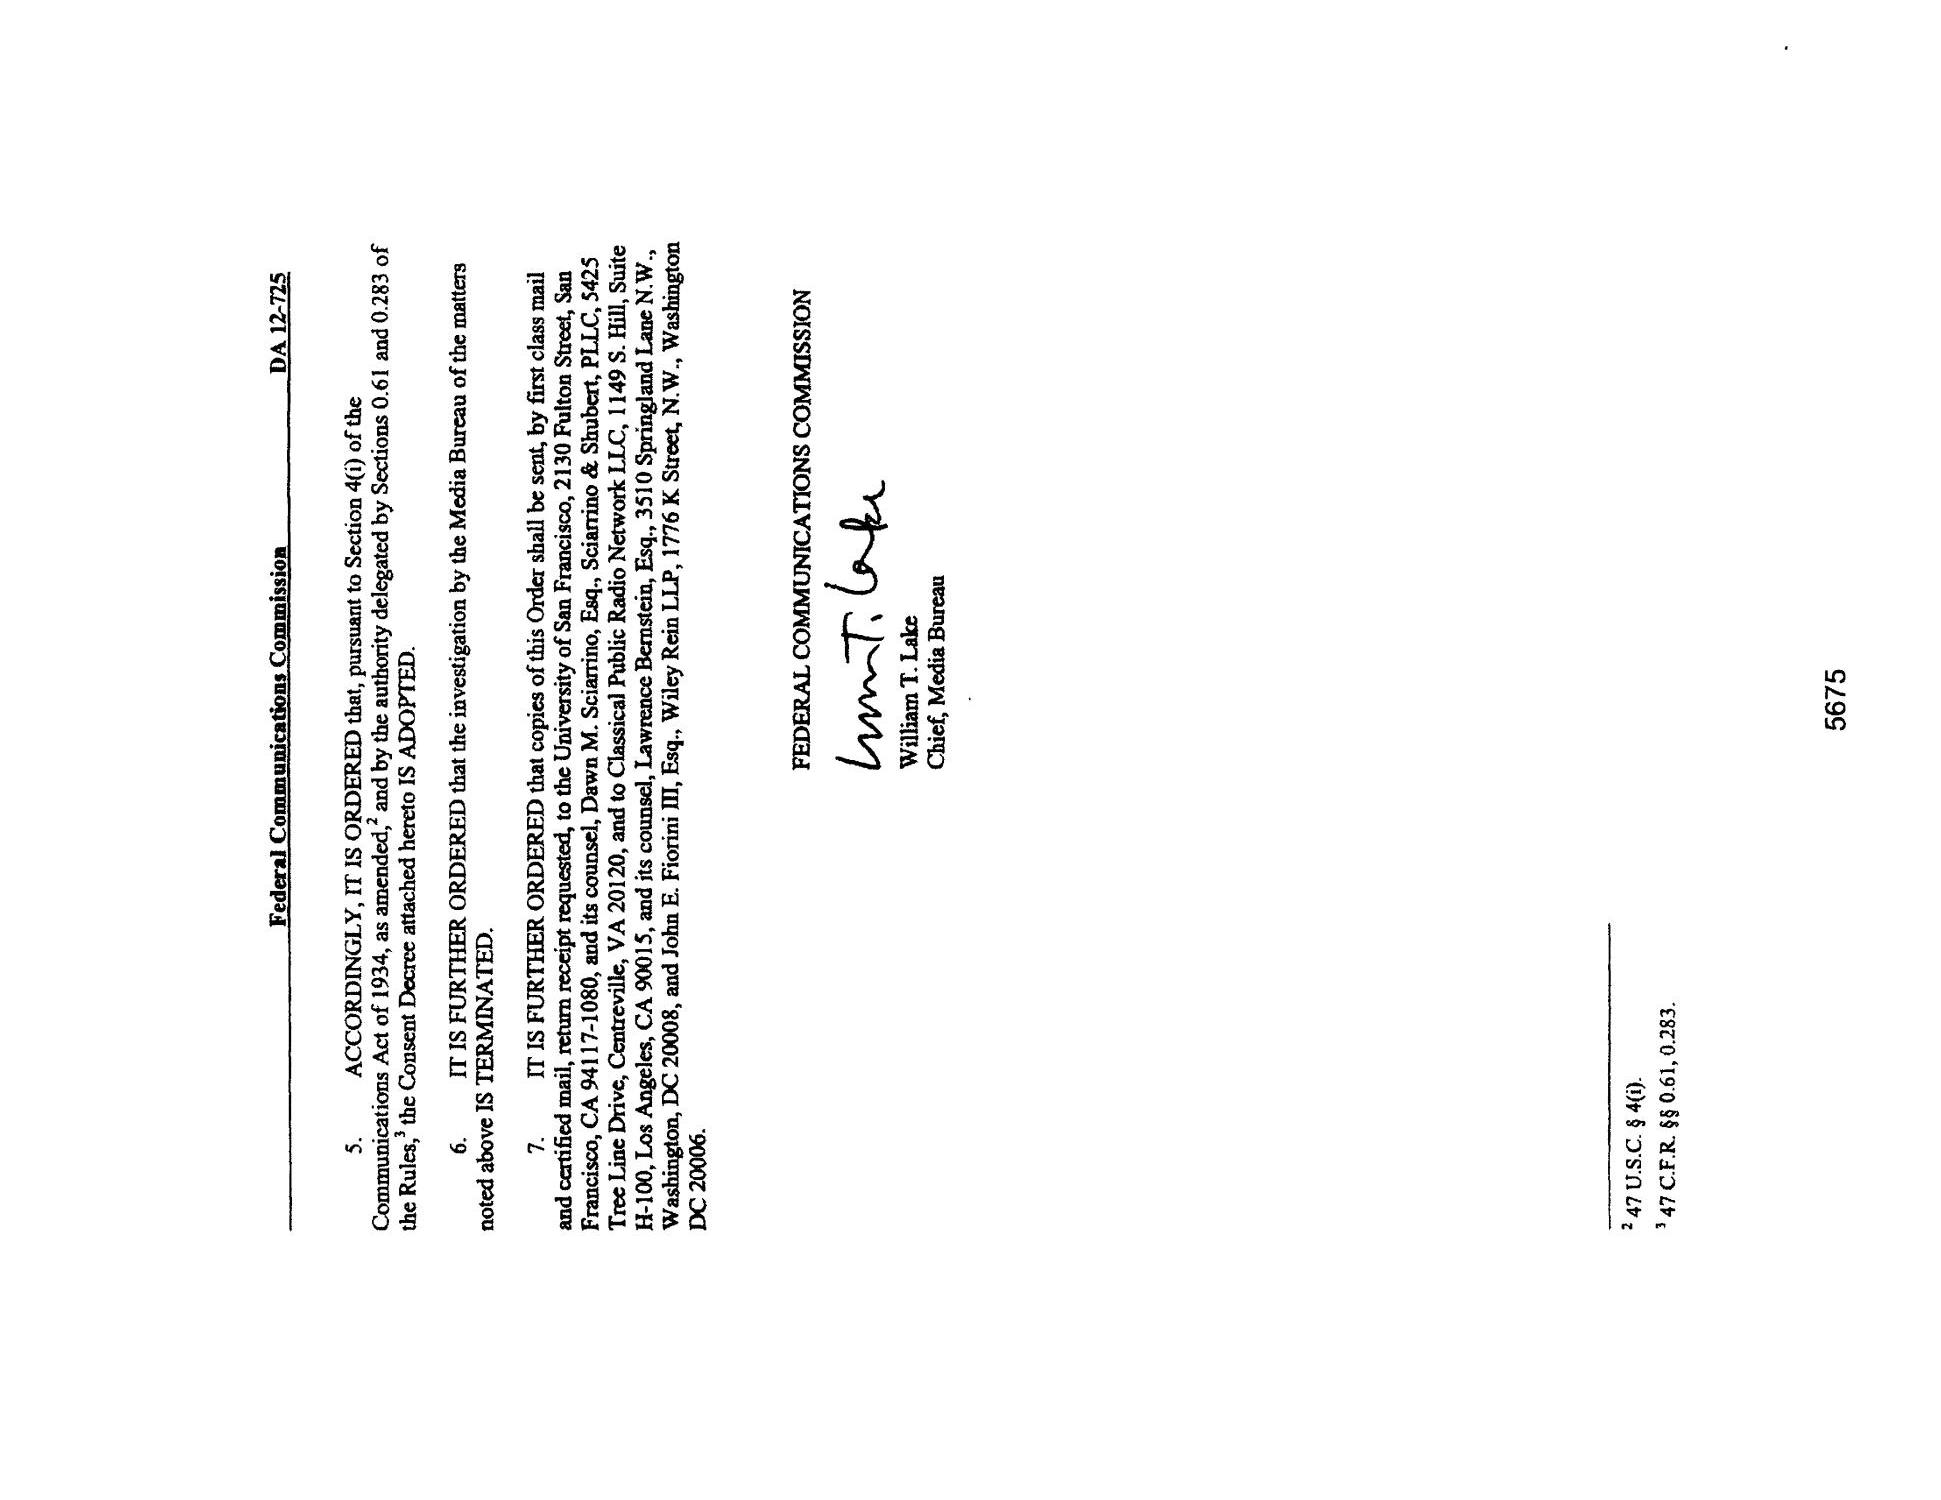 FCC Record, Volume 27, No. 7, Pages 5674 to 6652, May 23 - June 15, 2012
                                                
                                                    5675
                                                